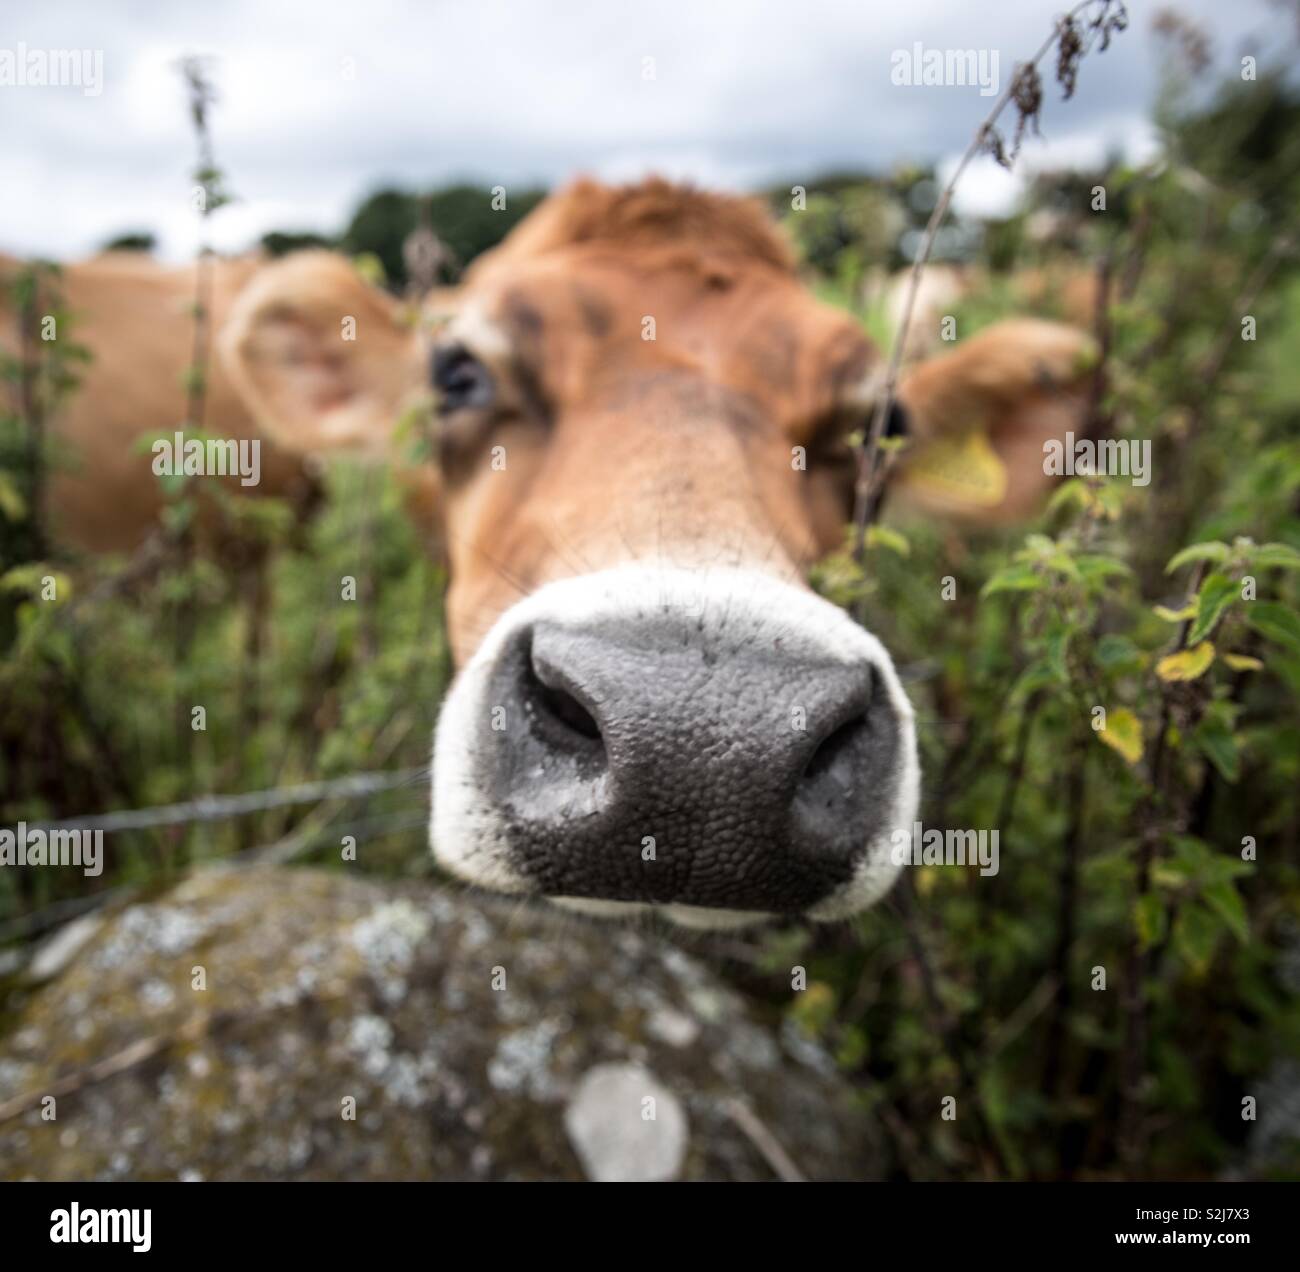 A portrait of the head of a dairy cow looking directly at the camera with a large nose prominent in a funny animal image Stock Photo